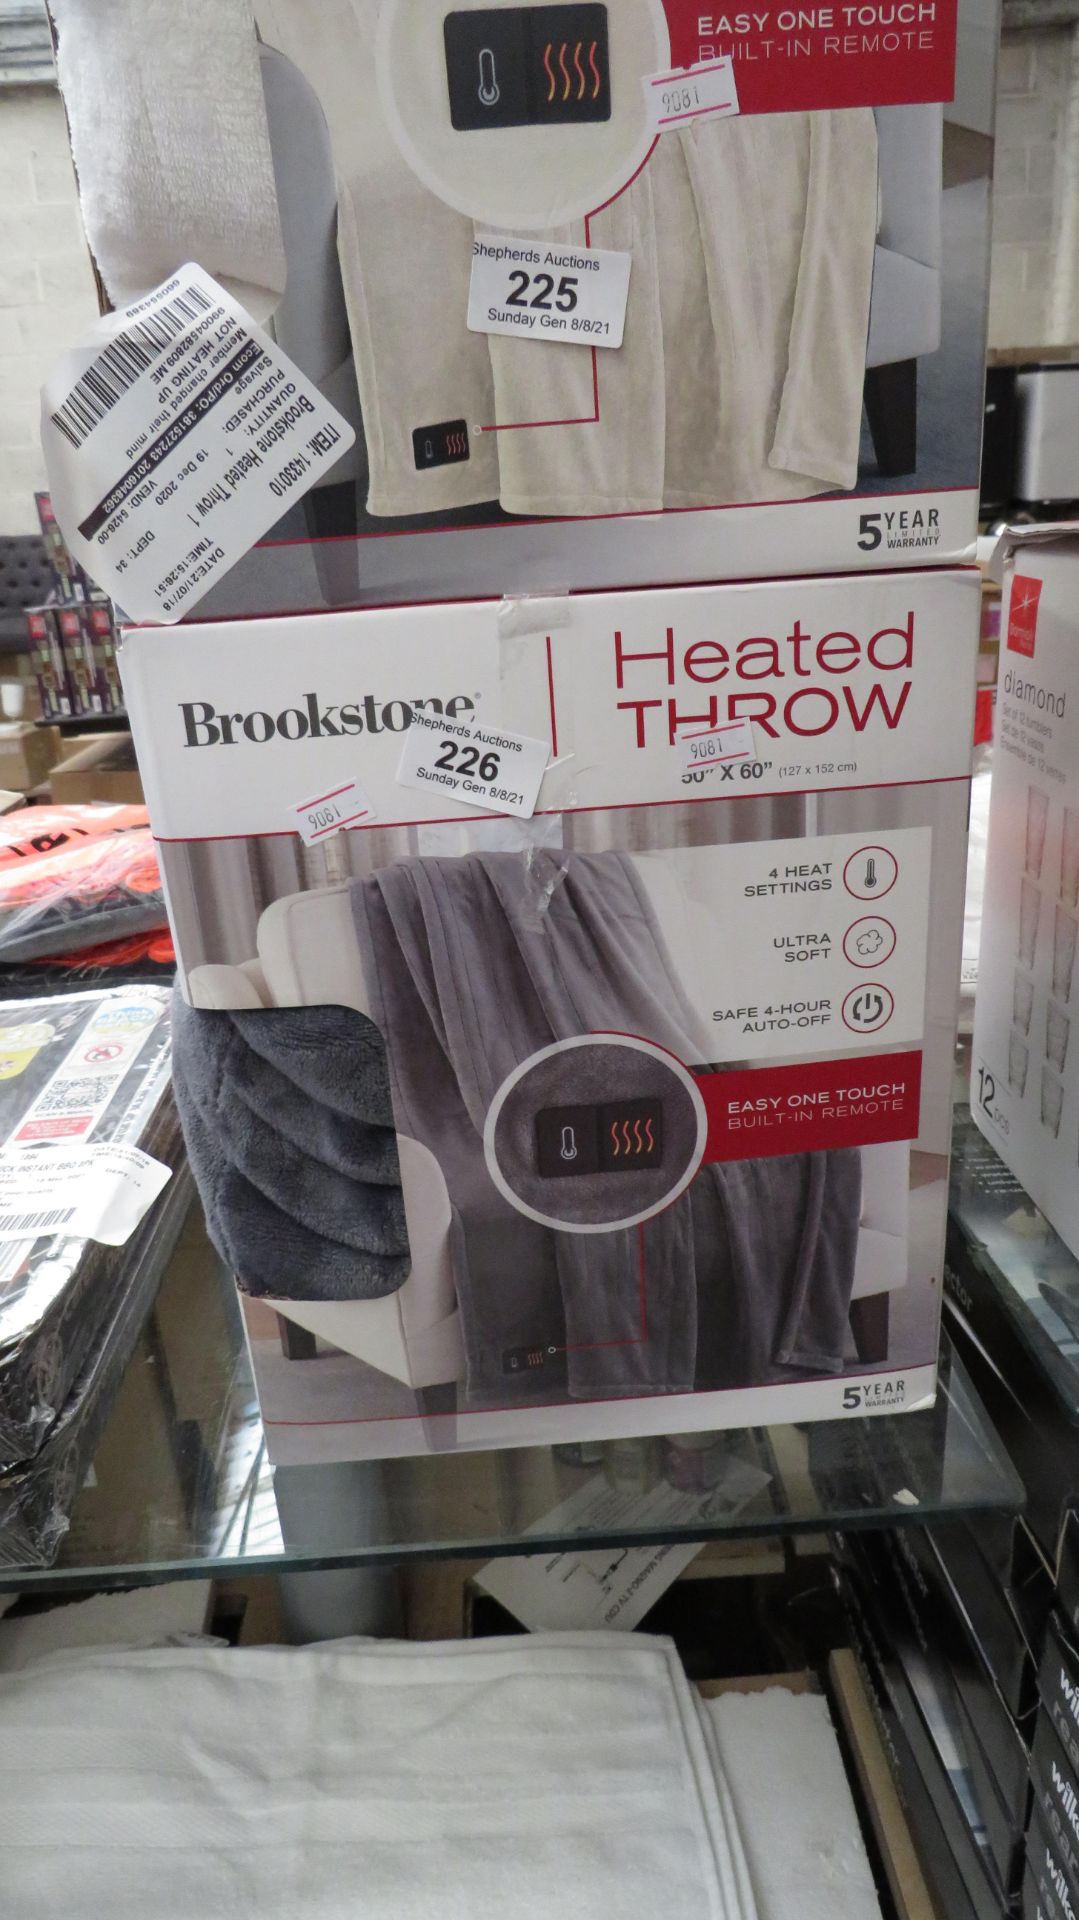 1X BROOKSTONE HEATED THROW, GREY, UNCHECKED IN BOX.